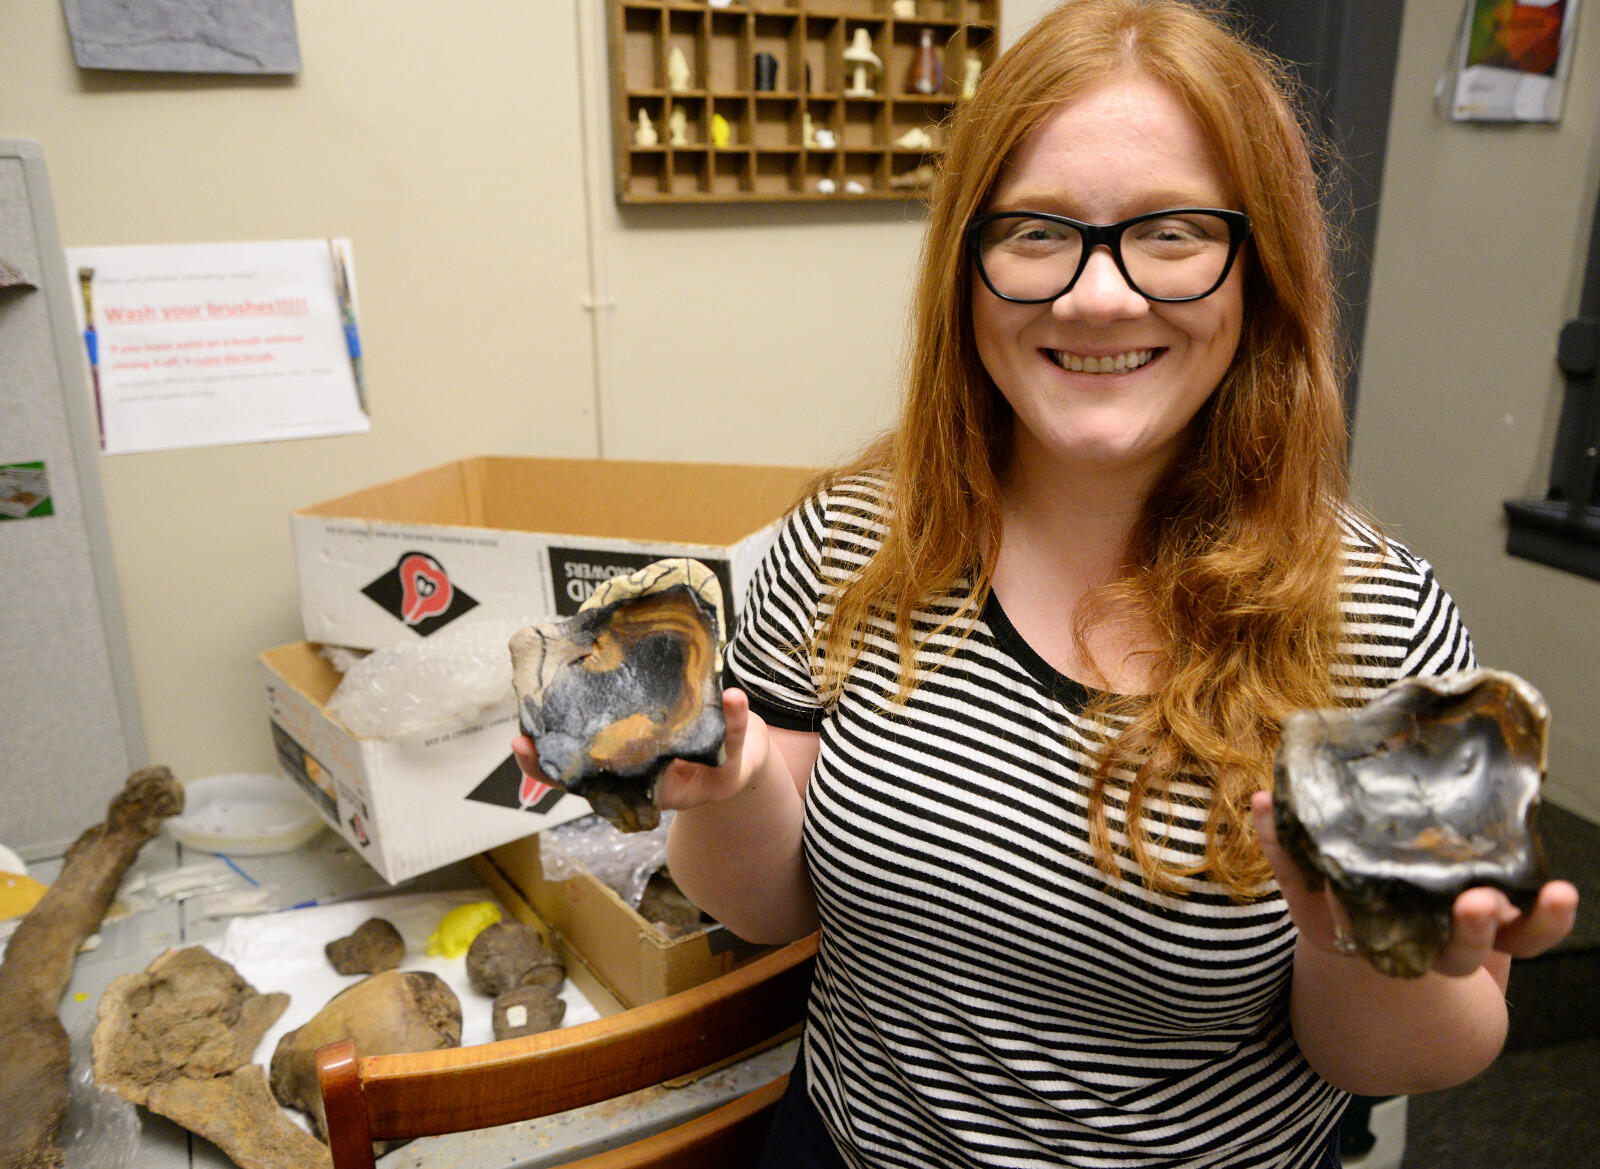 Kristen Egan, a senior anthropology major who interned in the Virtual Curation Laboratory, shows off a mastodon tooth fossil and a 3-D-printed replica that she painted.
